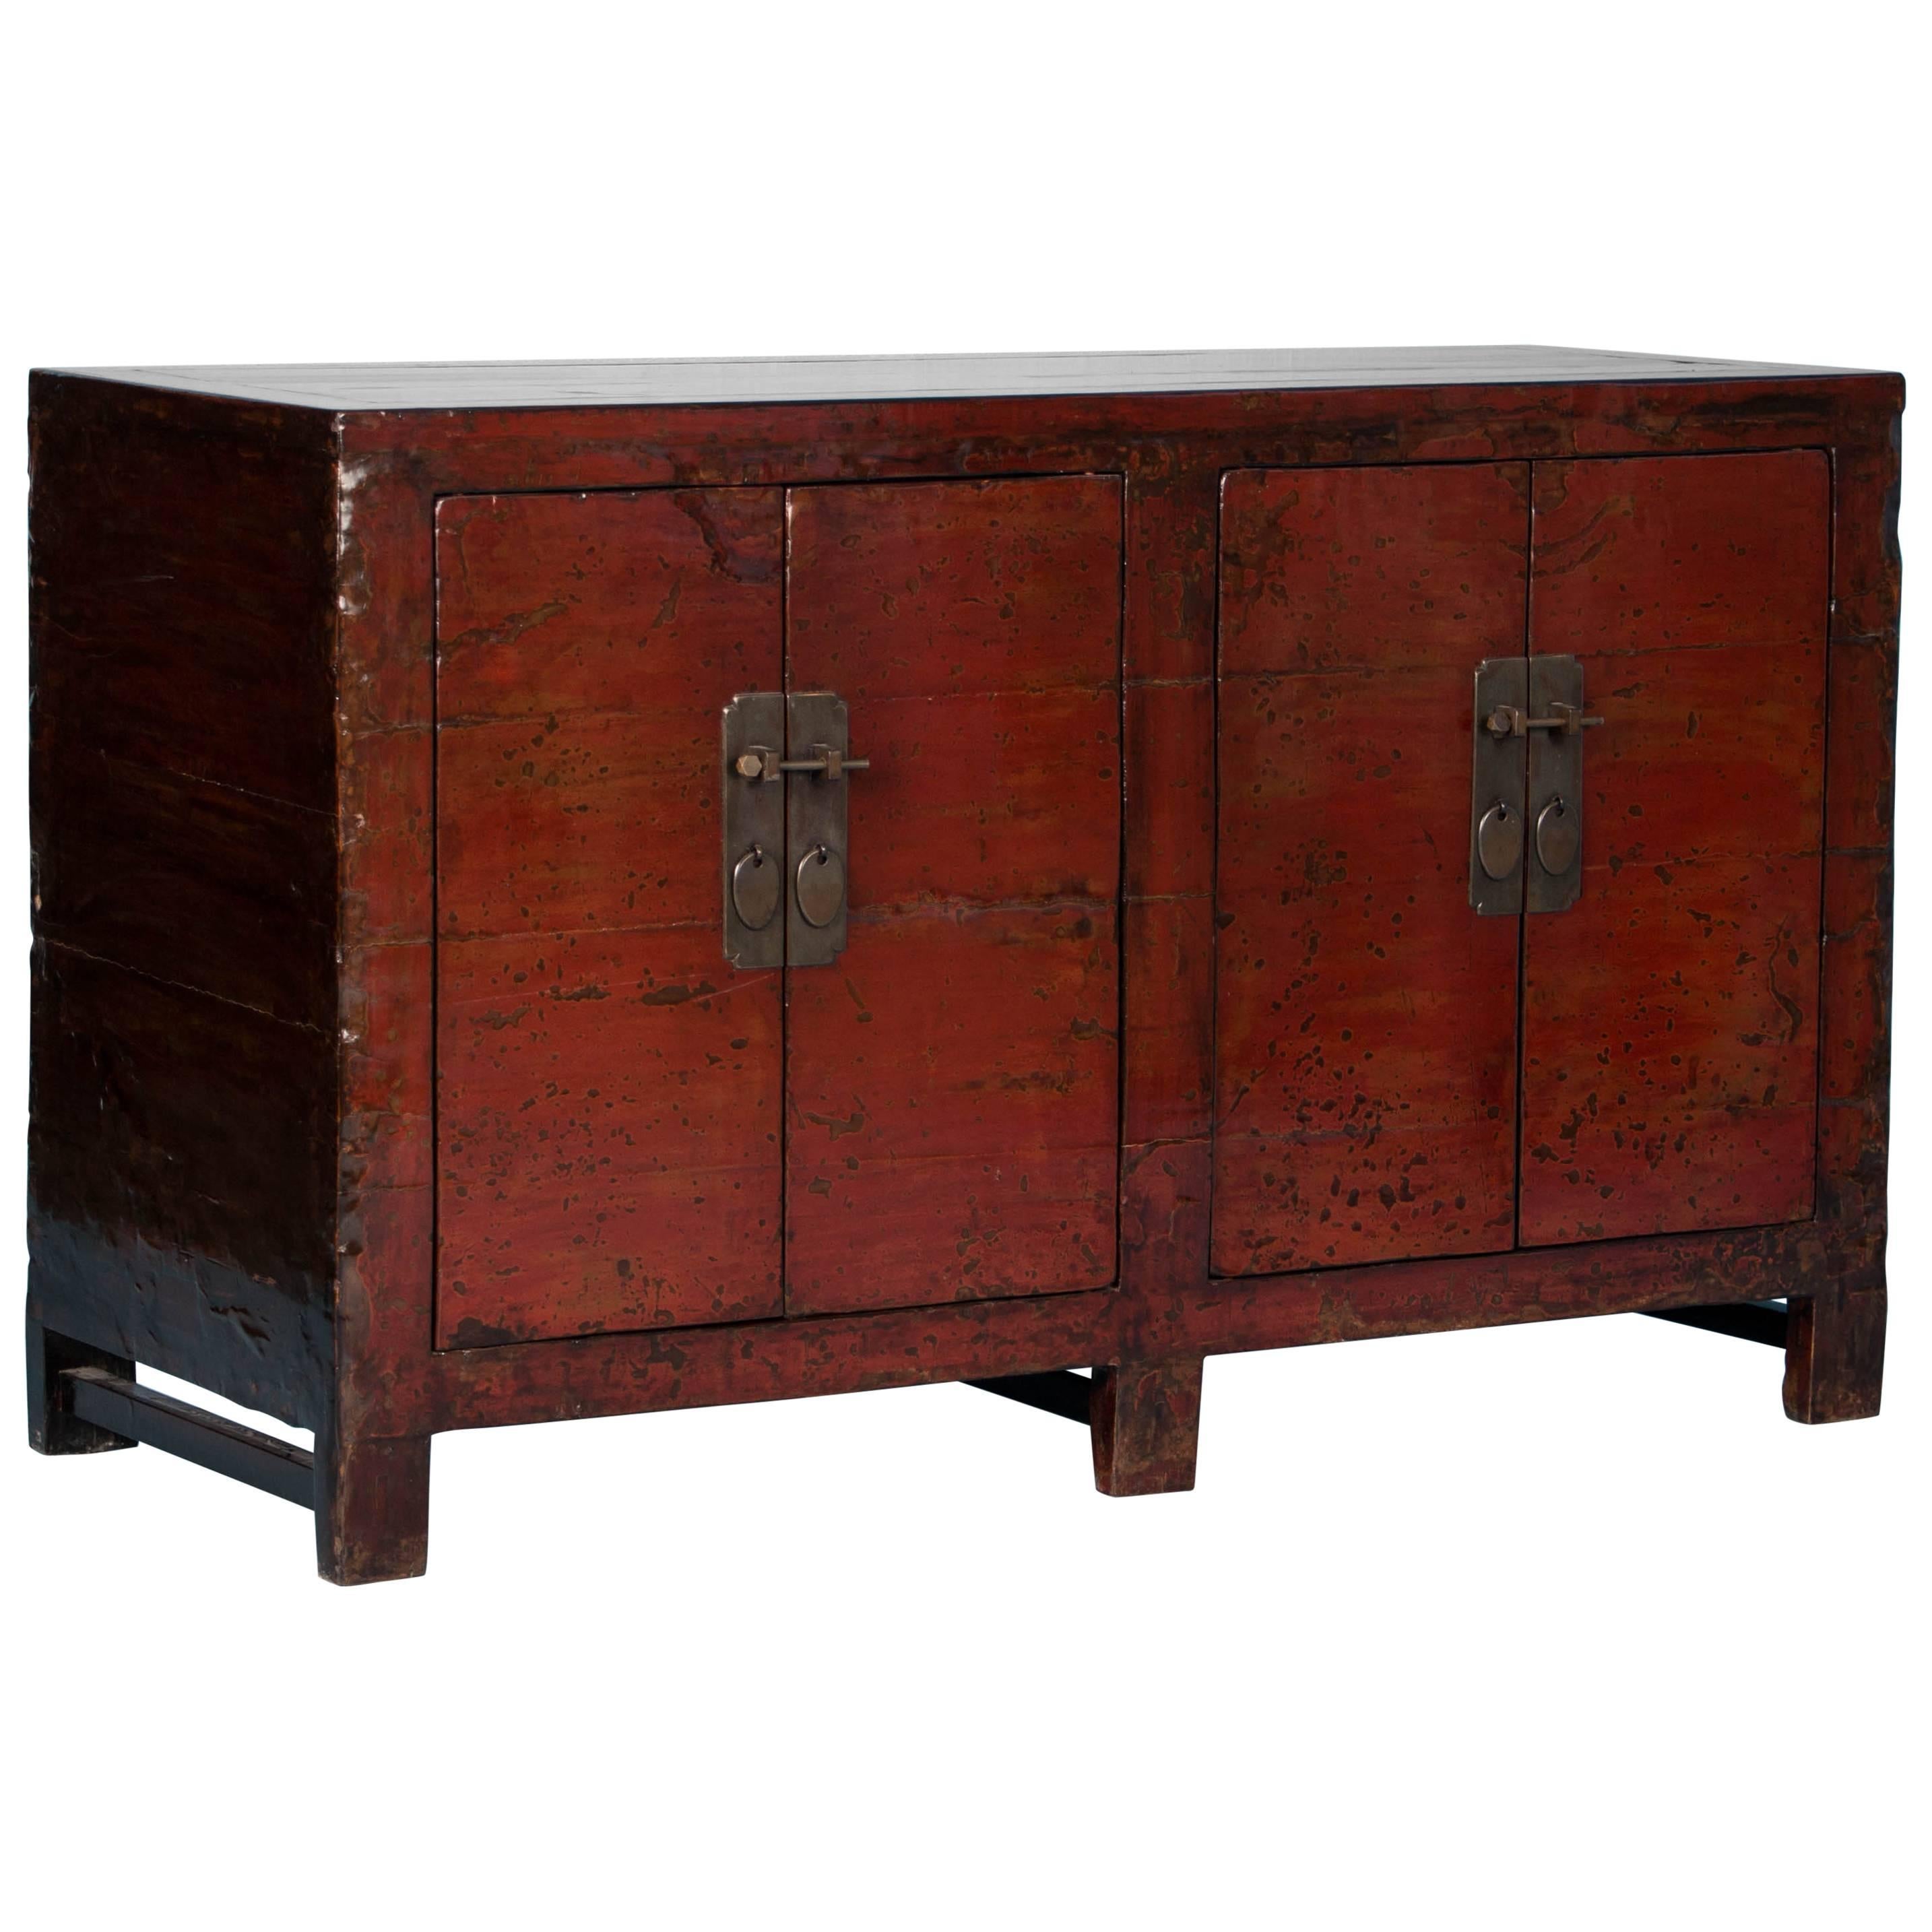 Antique Chinese Red Lacquer Cabinet Sideboard